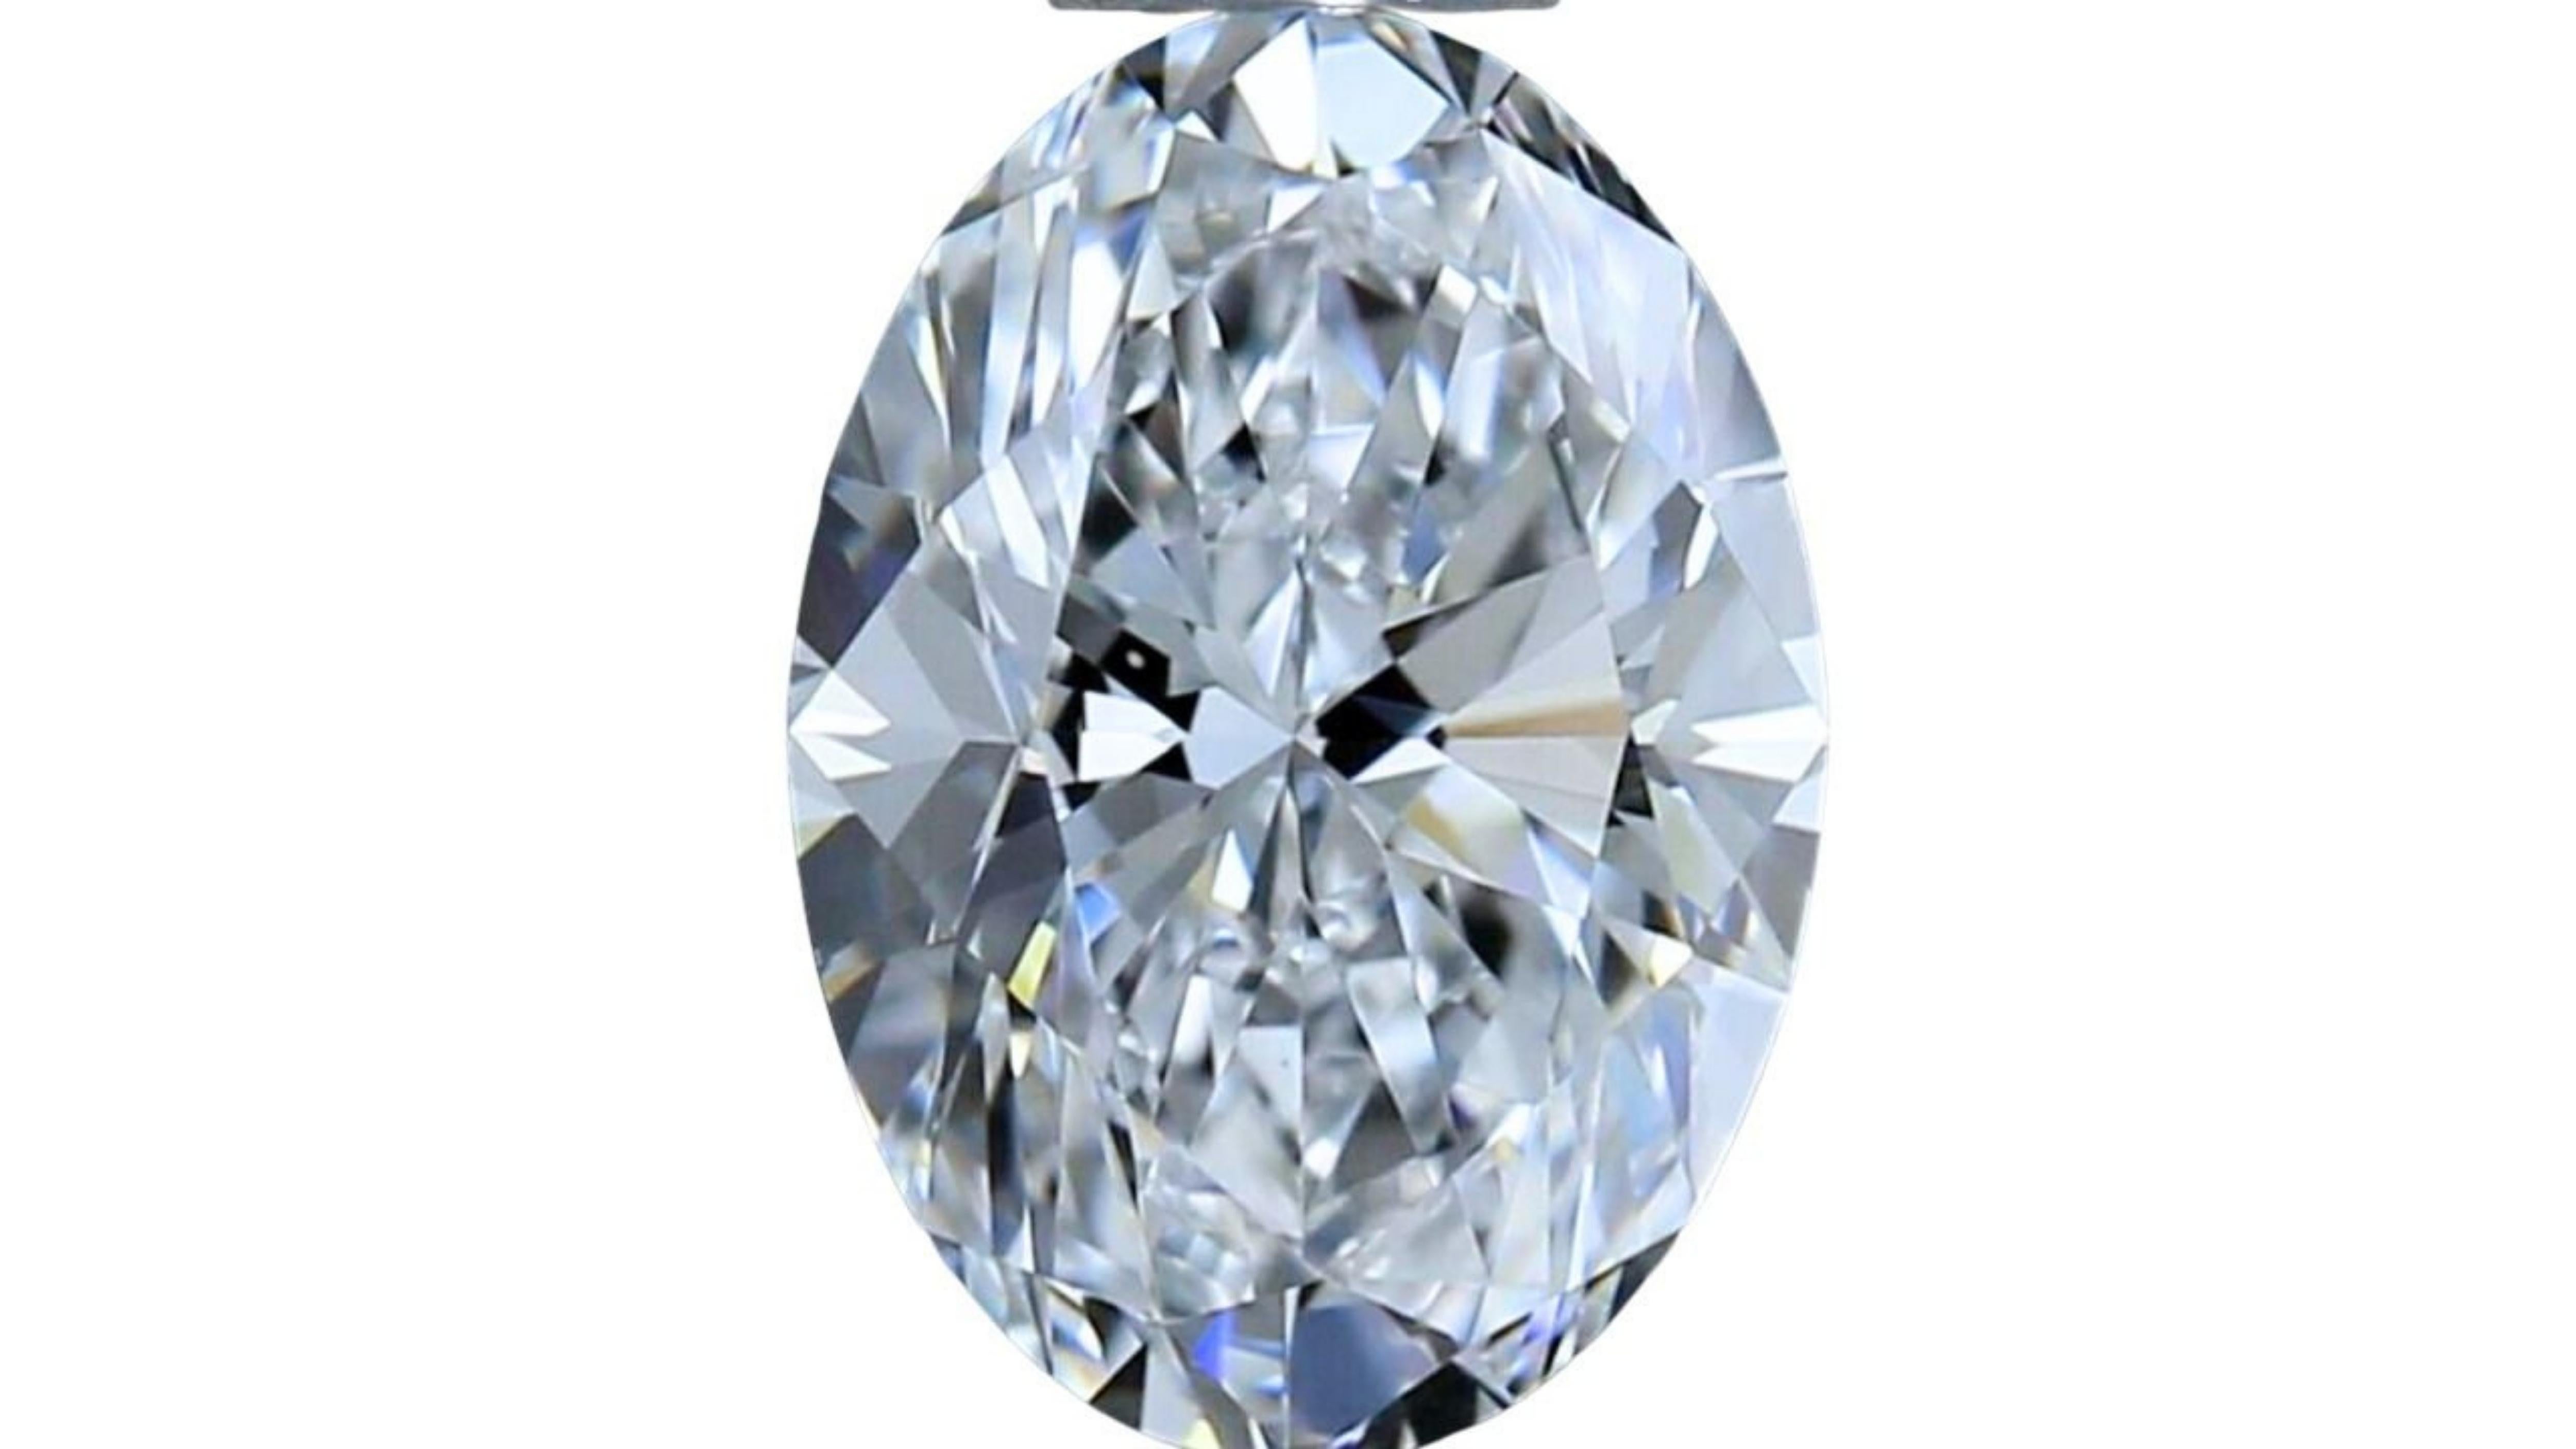 This stunning oval brilliant cut diamond is a rare and valuable gem. It is perfectly cut and polished to maximize its brilliance and sparkle. The color is D, the highest possible grade, and the clarity is VVS2, meaning that it has very few